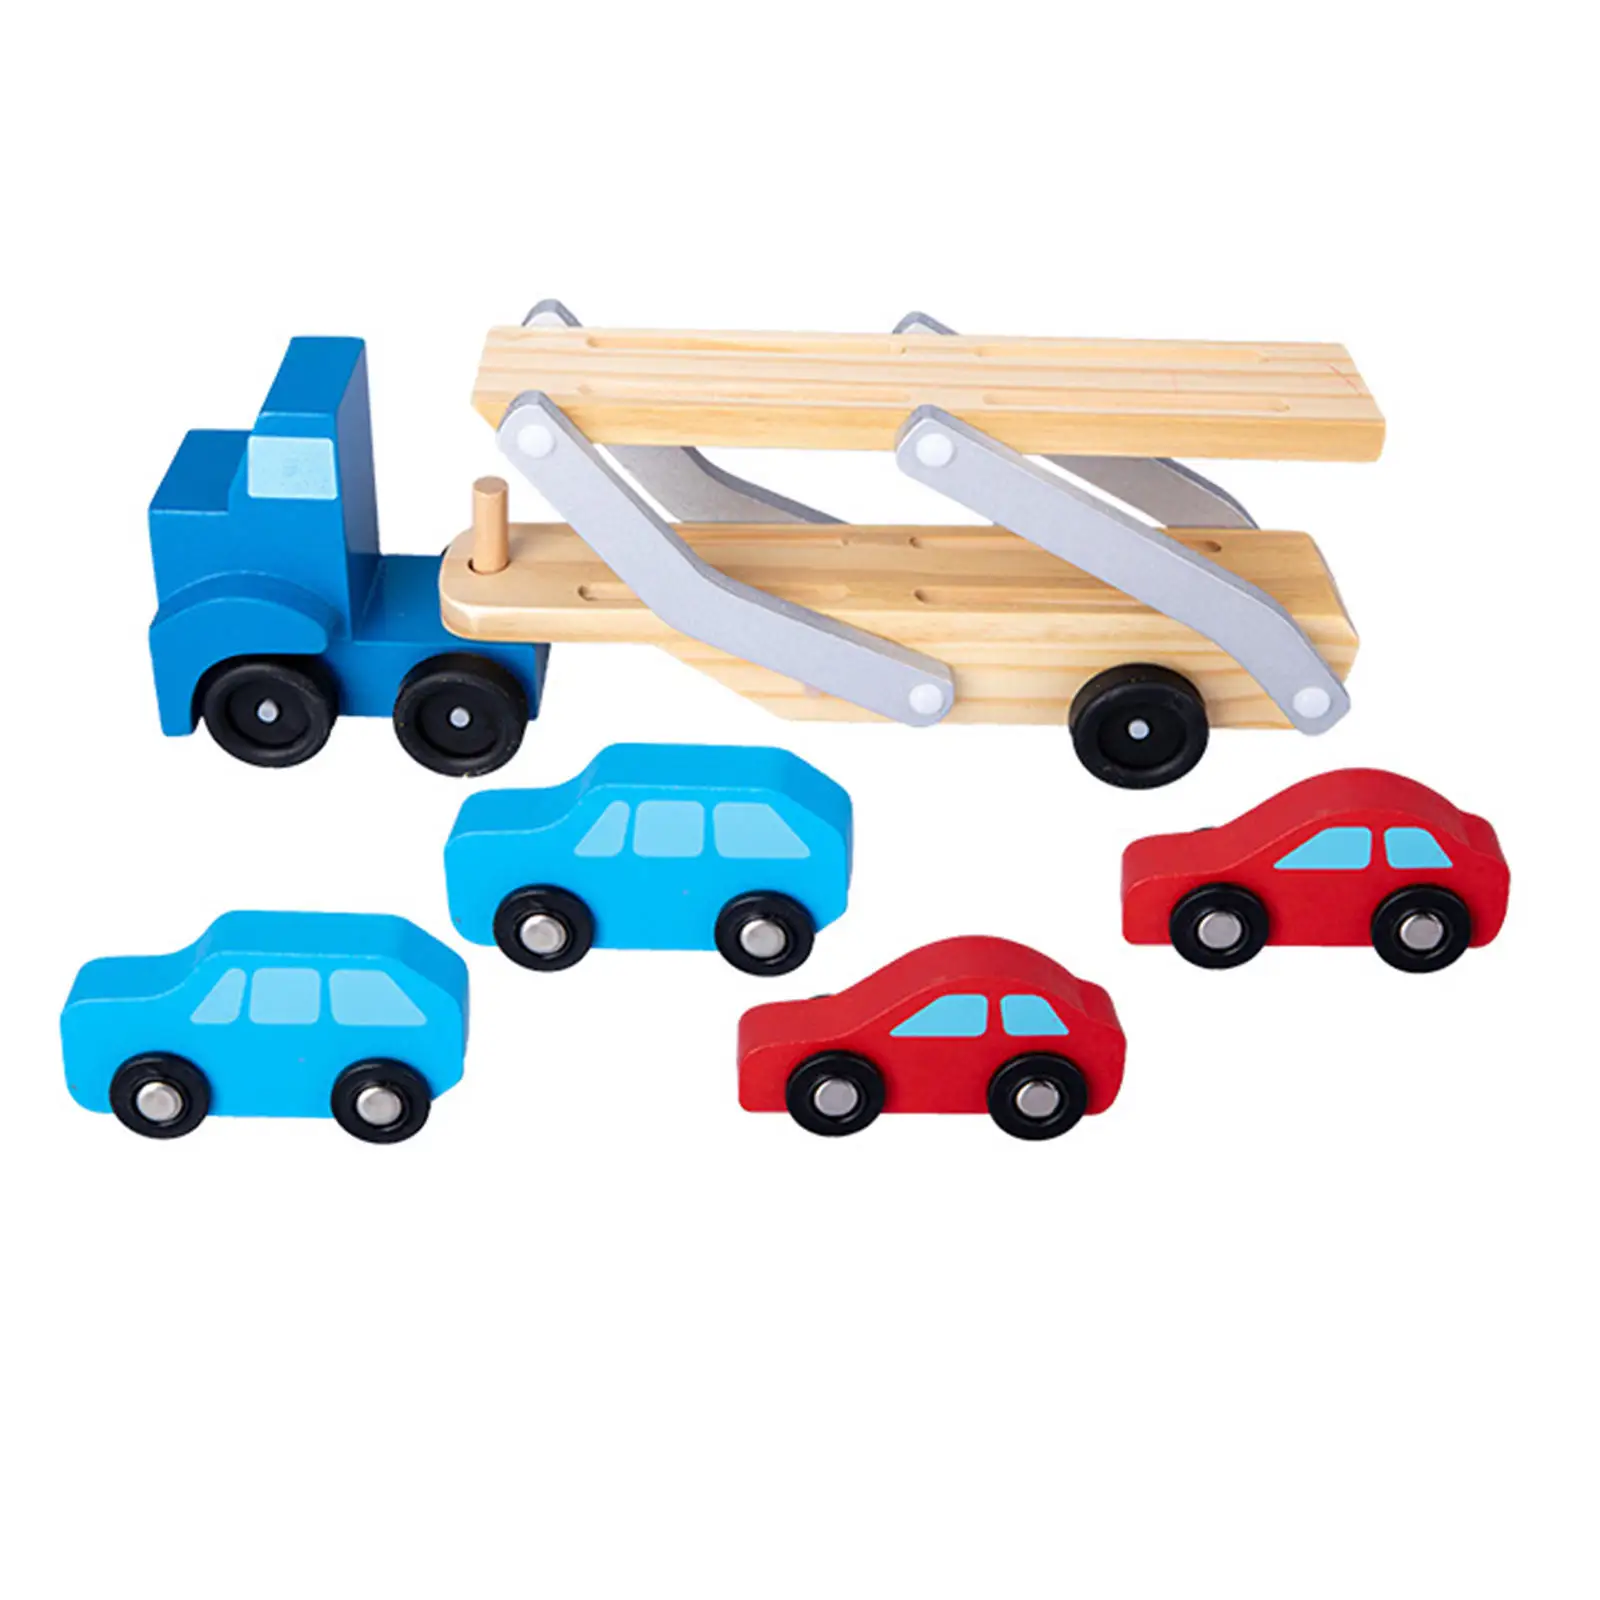 Car Carrier Truck Tractor Truck for Children 3, 4, 5, and 6 Year Olds Birthday Gifts